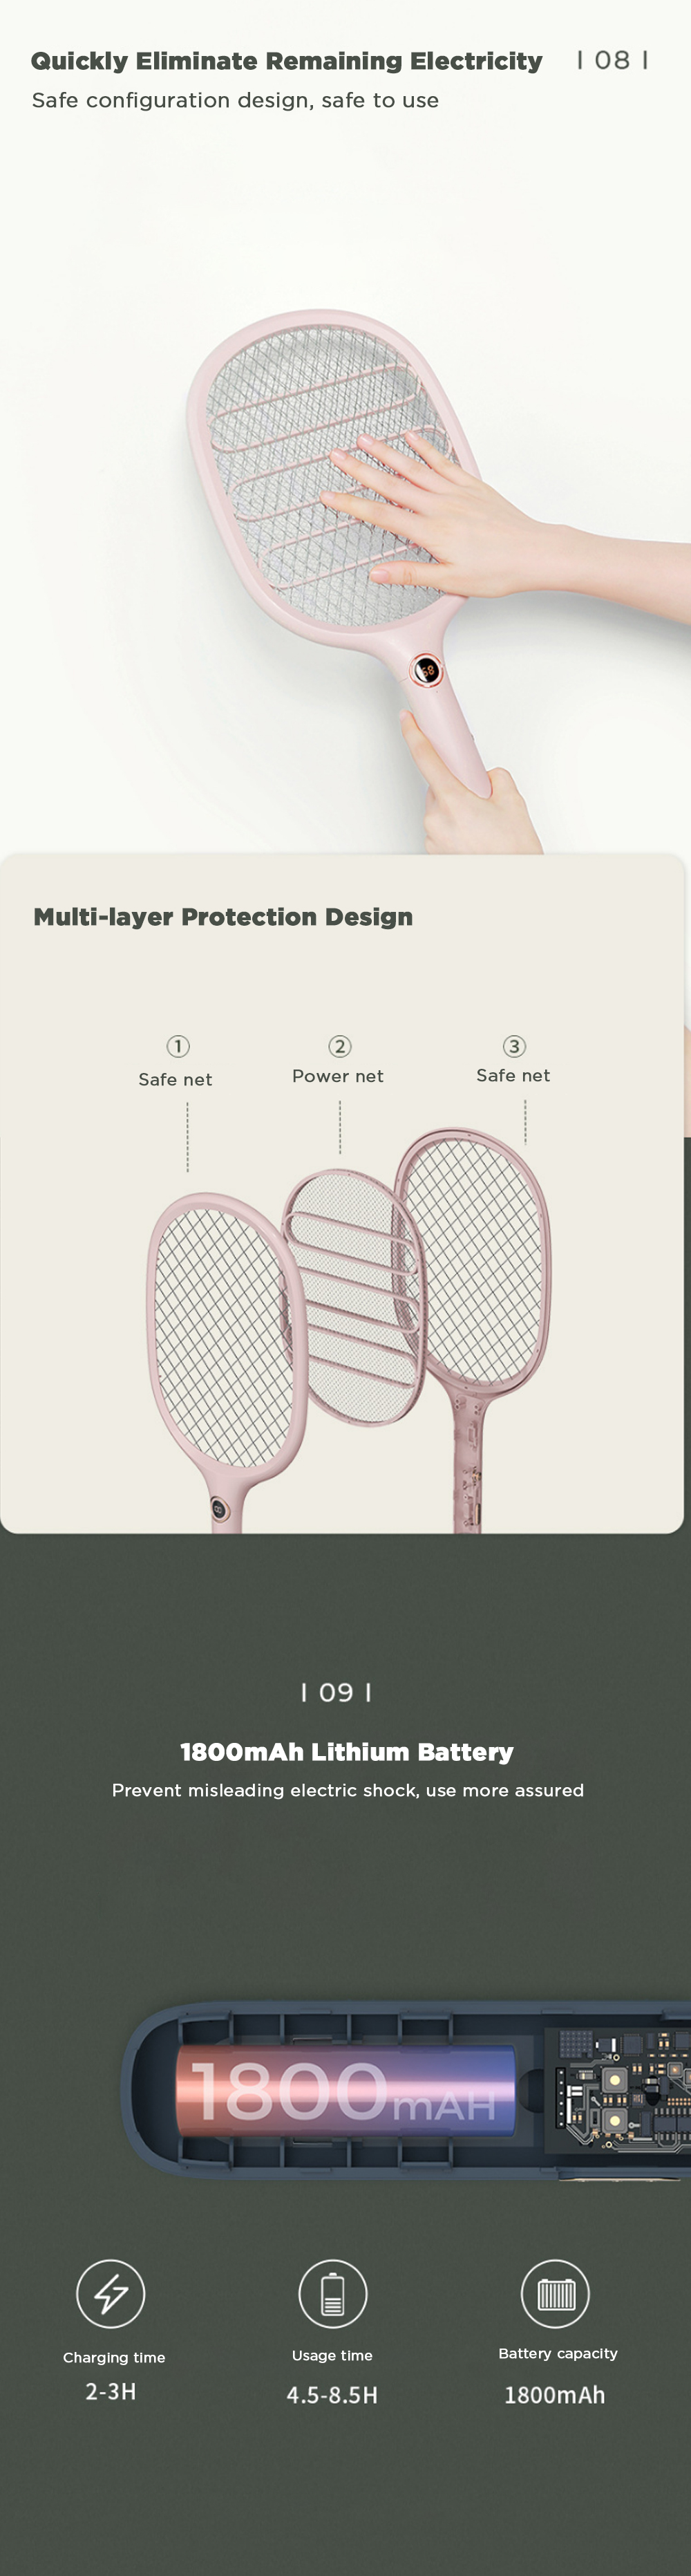 LIBERFEEL-2-in-1-Electric-Fly-Mosquito-Swatter-1800mAh-USBMagnetic-Rechargeable-3-Layer-Safety-Mesh--1730073-6